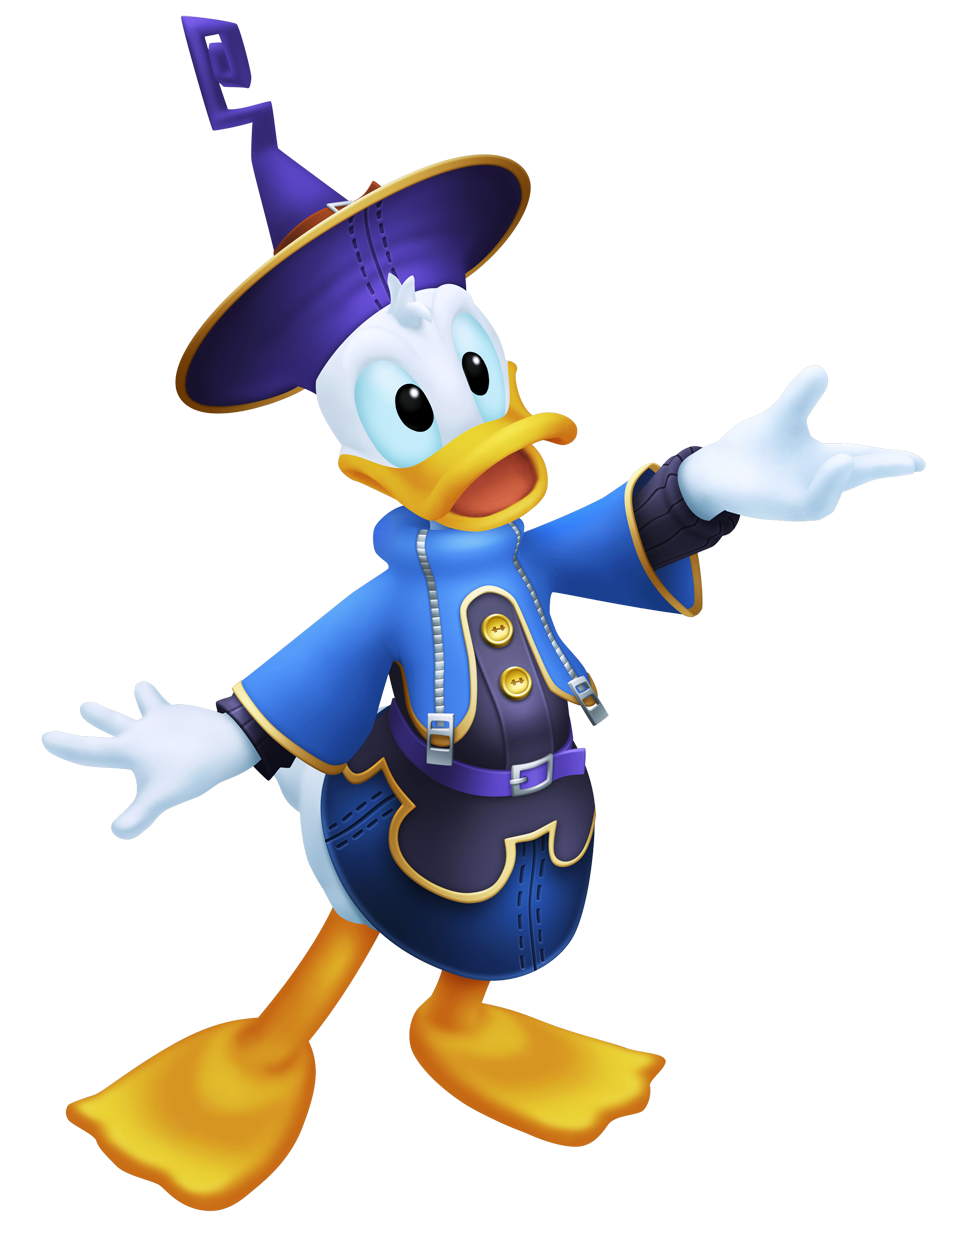 daisy duck png